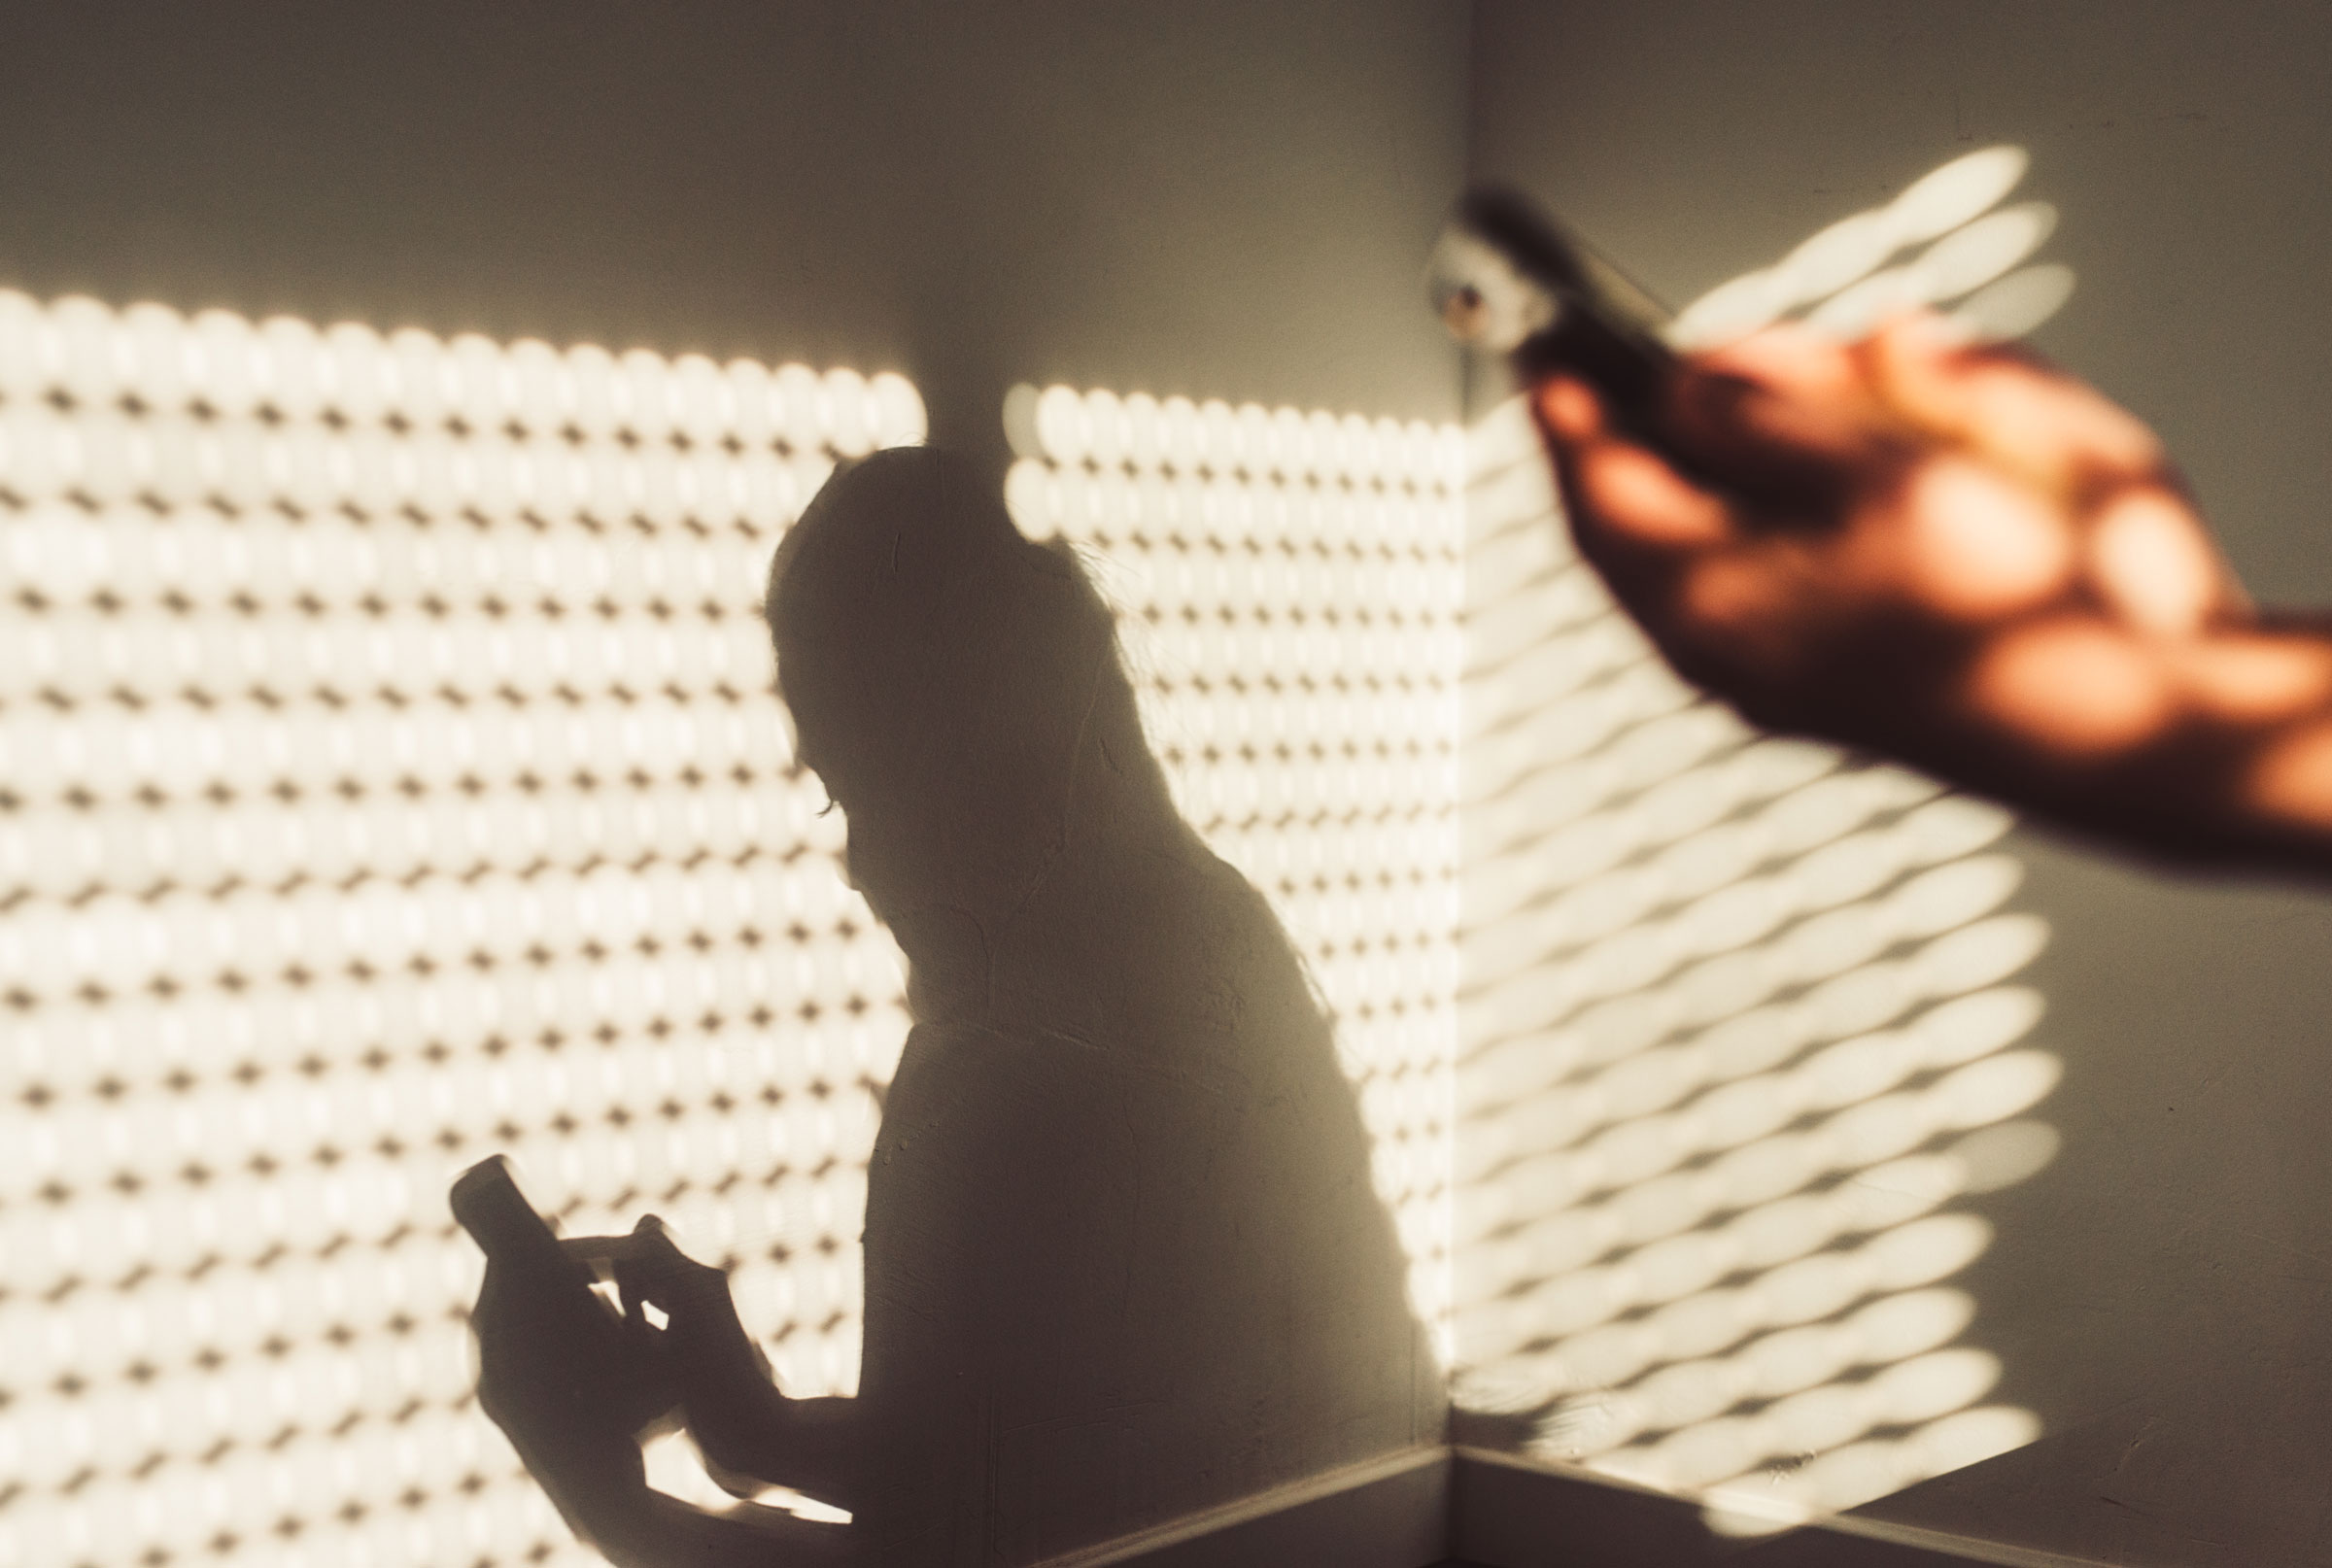 Shadow of a woman using a smartphone